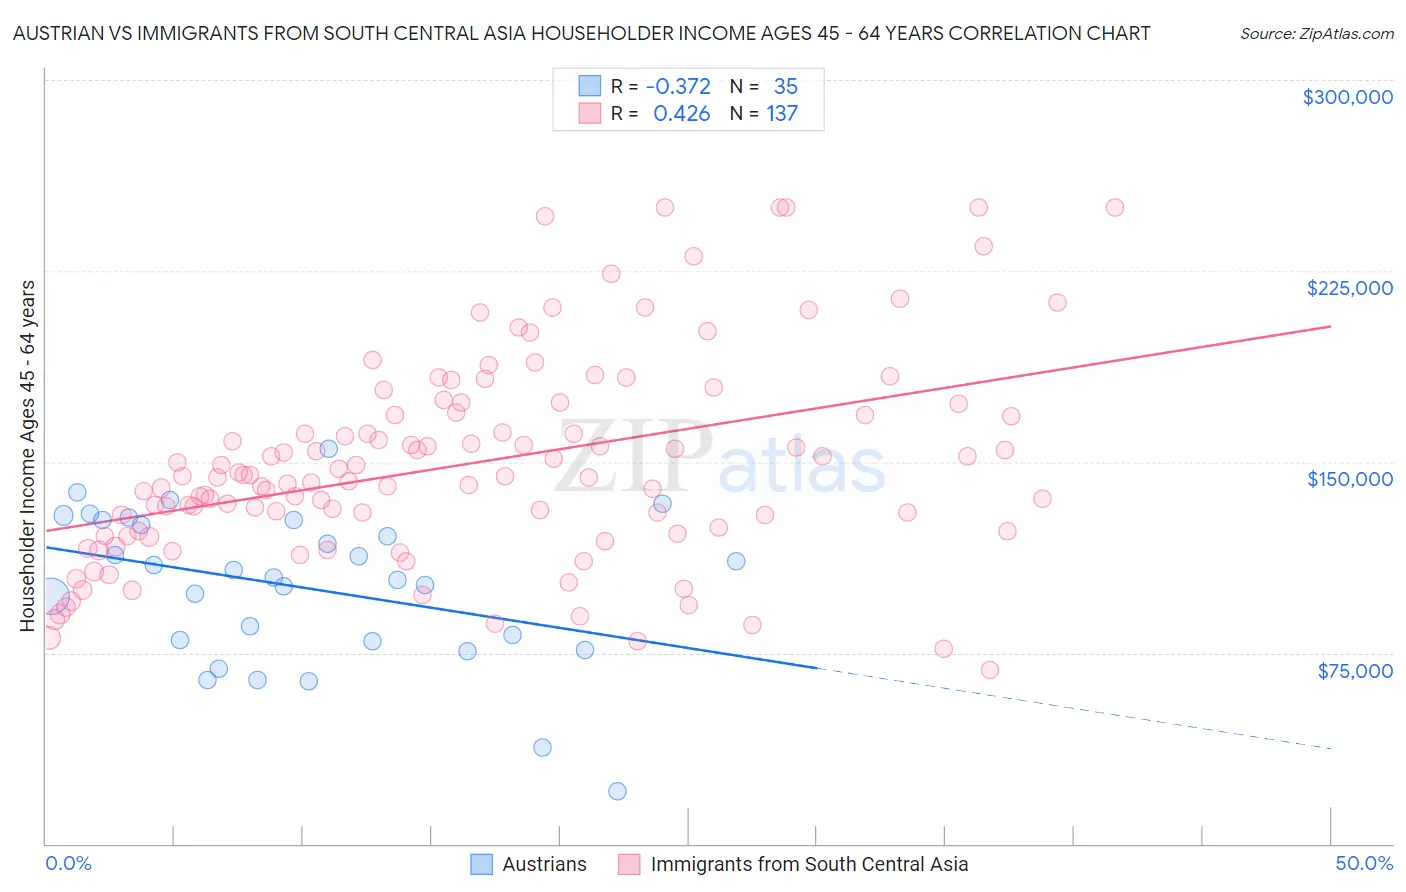 Austrian vs Immigrants from South Central Asia Householder Income Ages 45 - 64 years